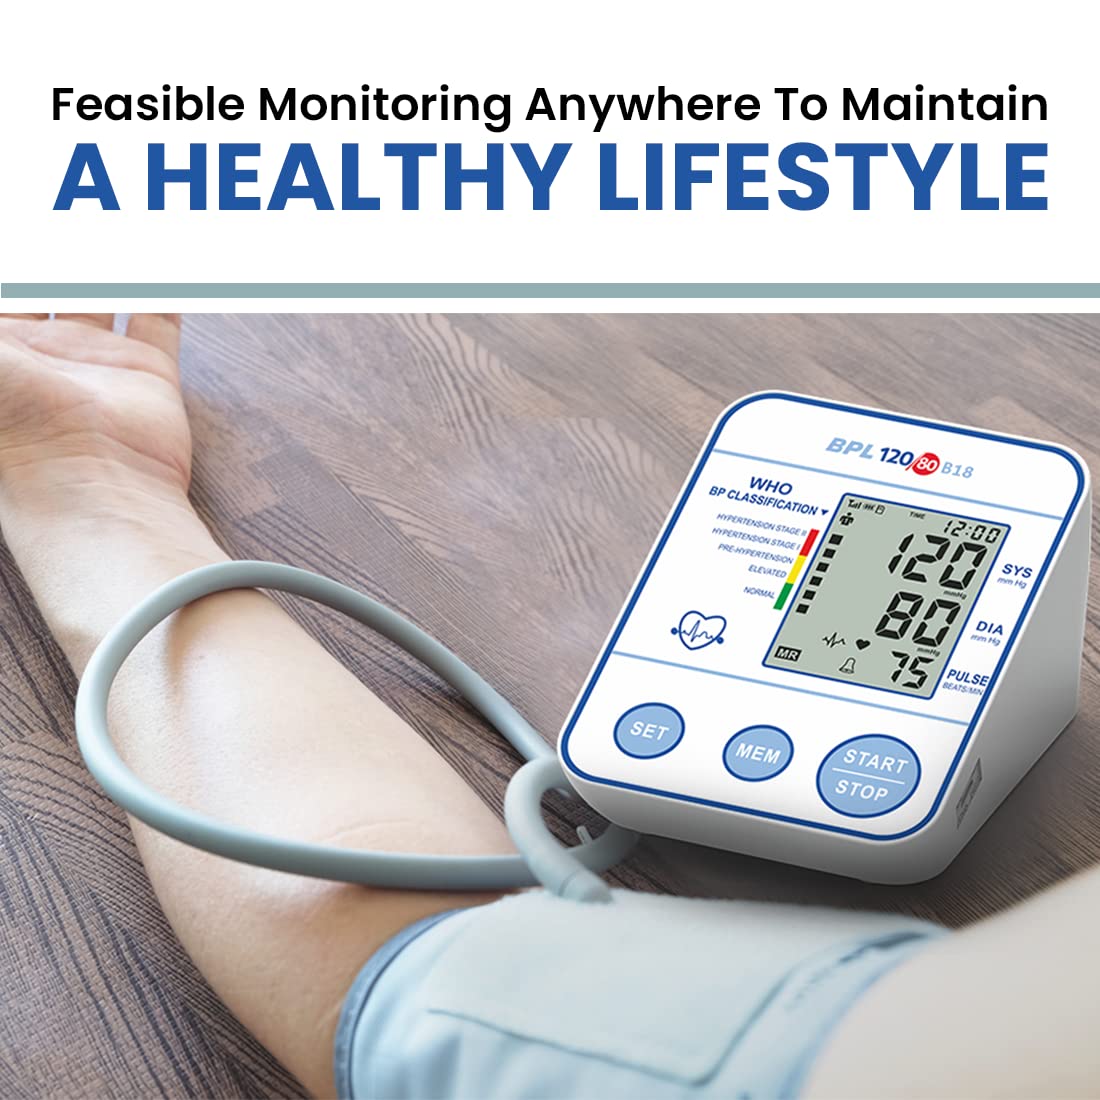 BPL Medical Technologies BPL 120/80 B18 Digital Blood Pressure Monitor with USB Compatibility (White) | CE Certified